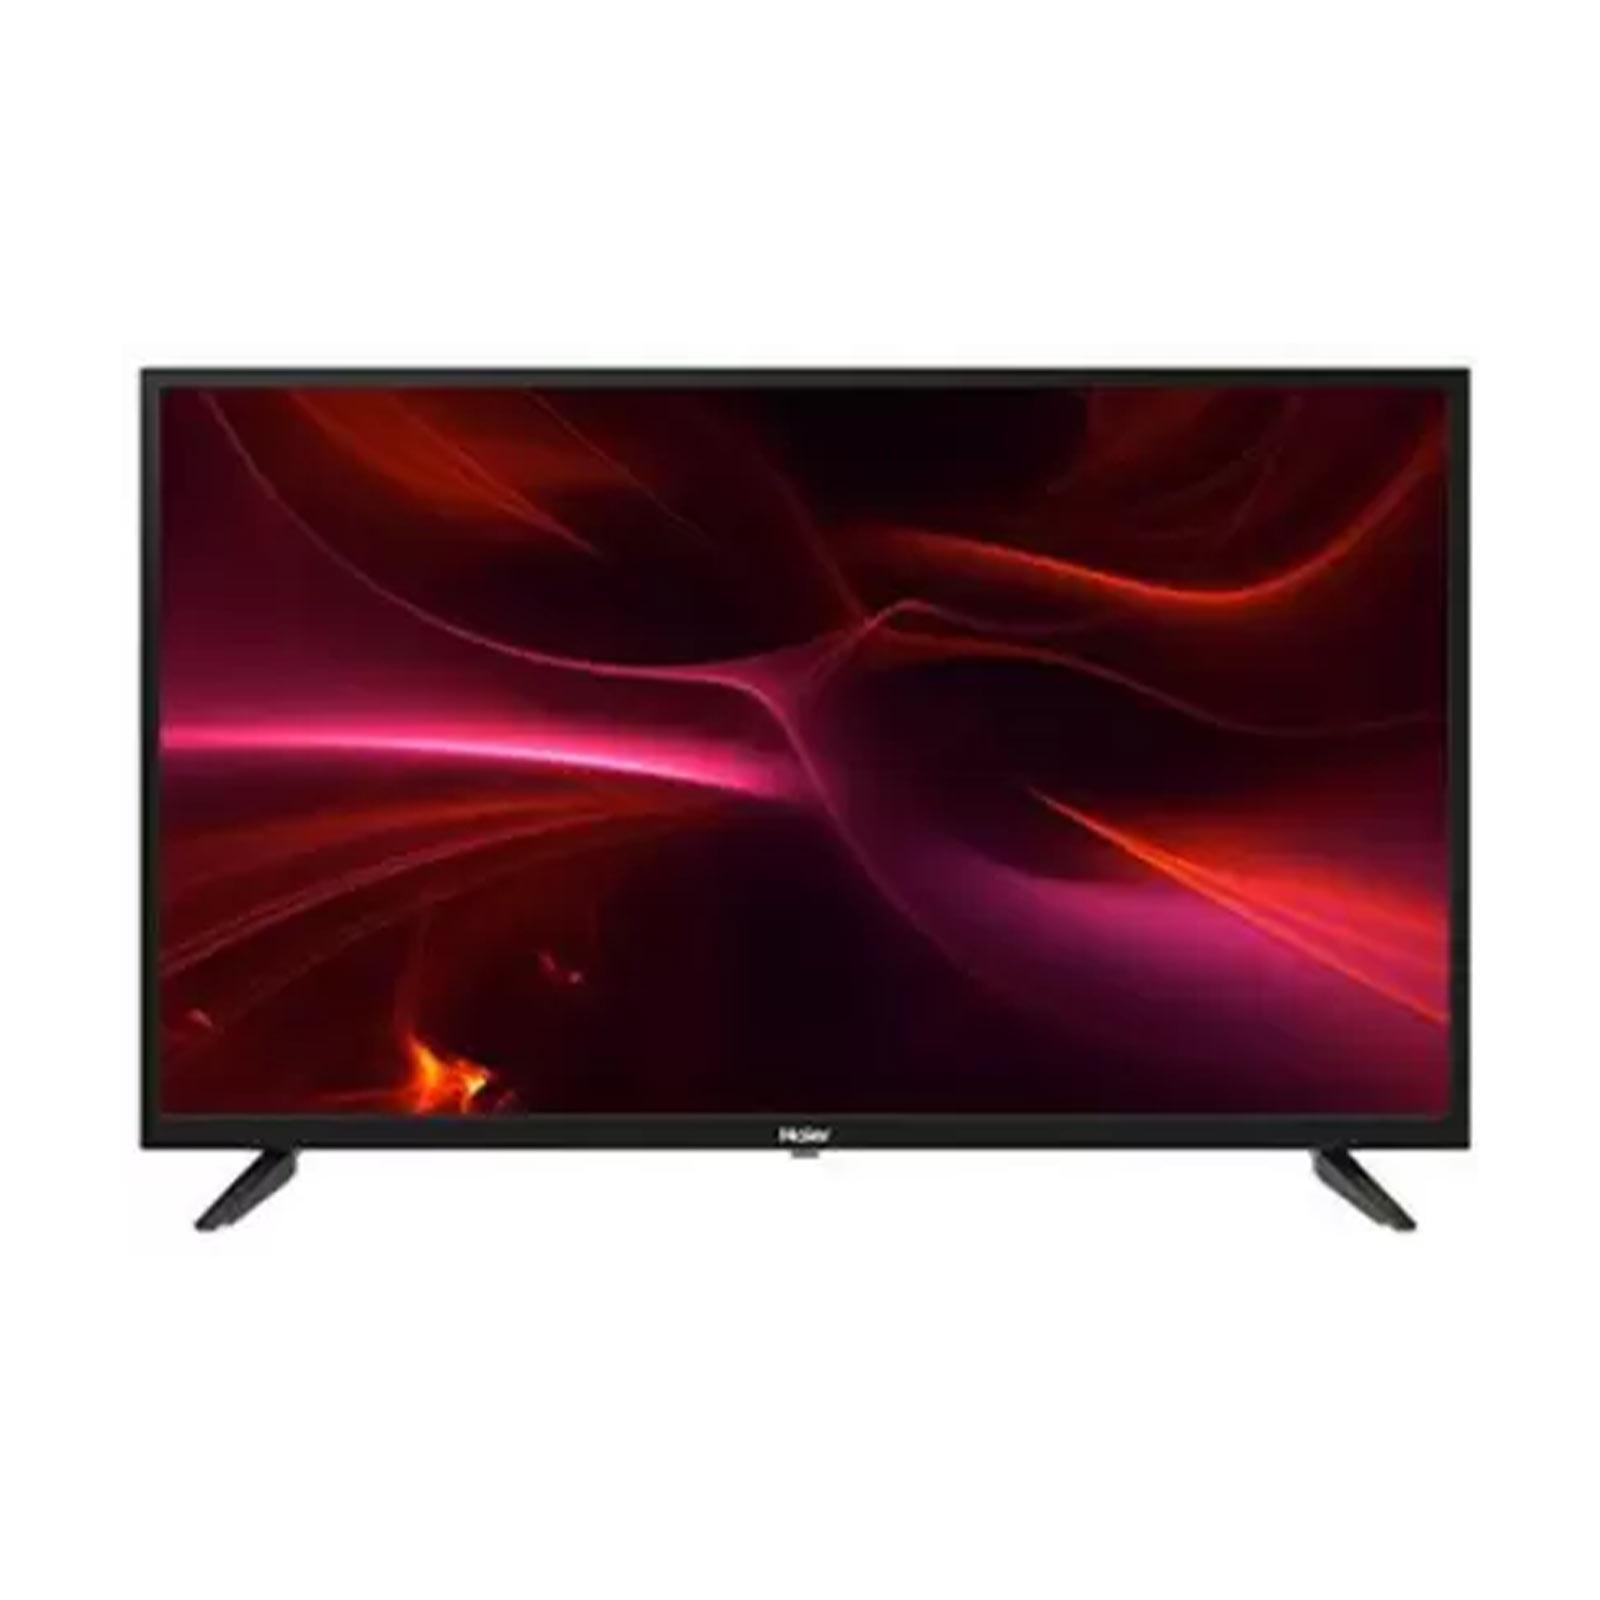 Buy Haier Smart LED TV LE32K7500GA at prices | Best Online Shopping in India | Shop Mobiles, Laptops, Home Appliances & more Offers & Deals!